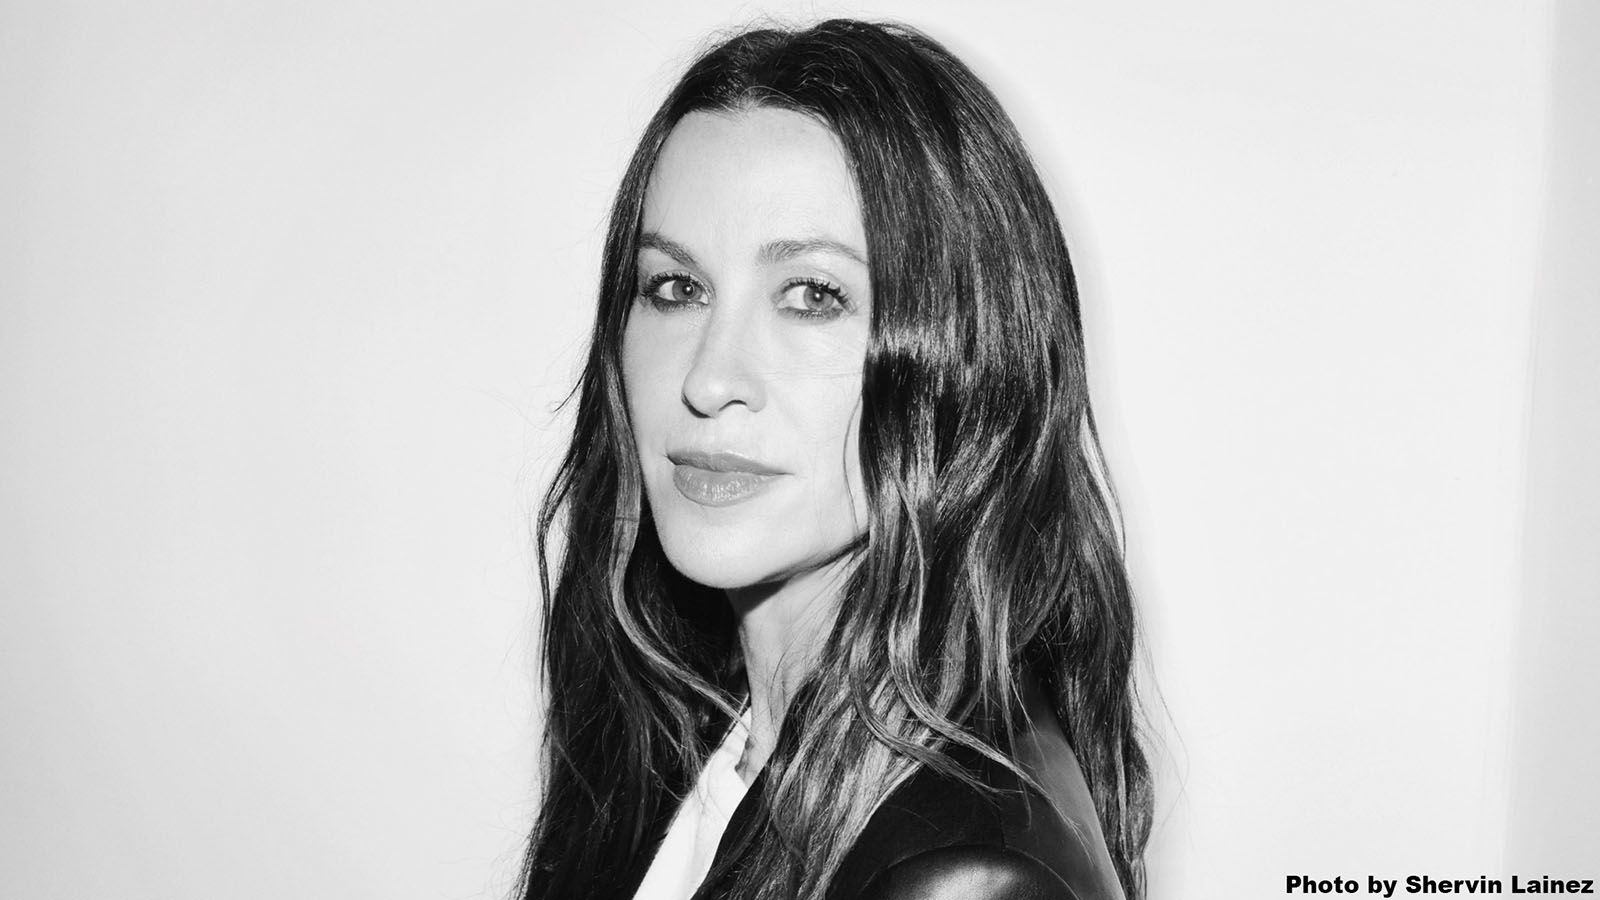 Alanis Morissette will be among the headliners at this year's Pitchfork Music Festival.